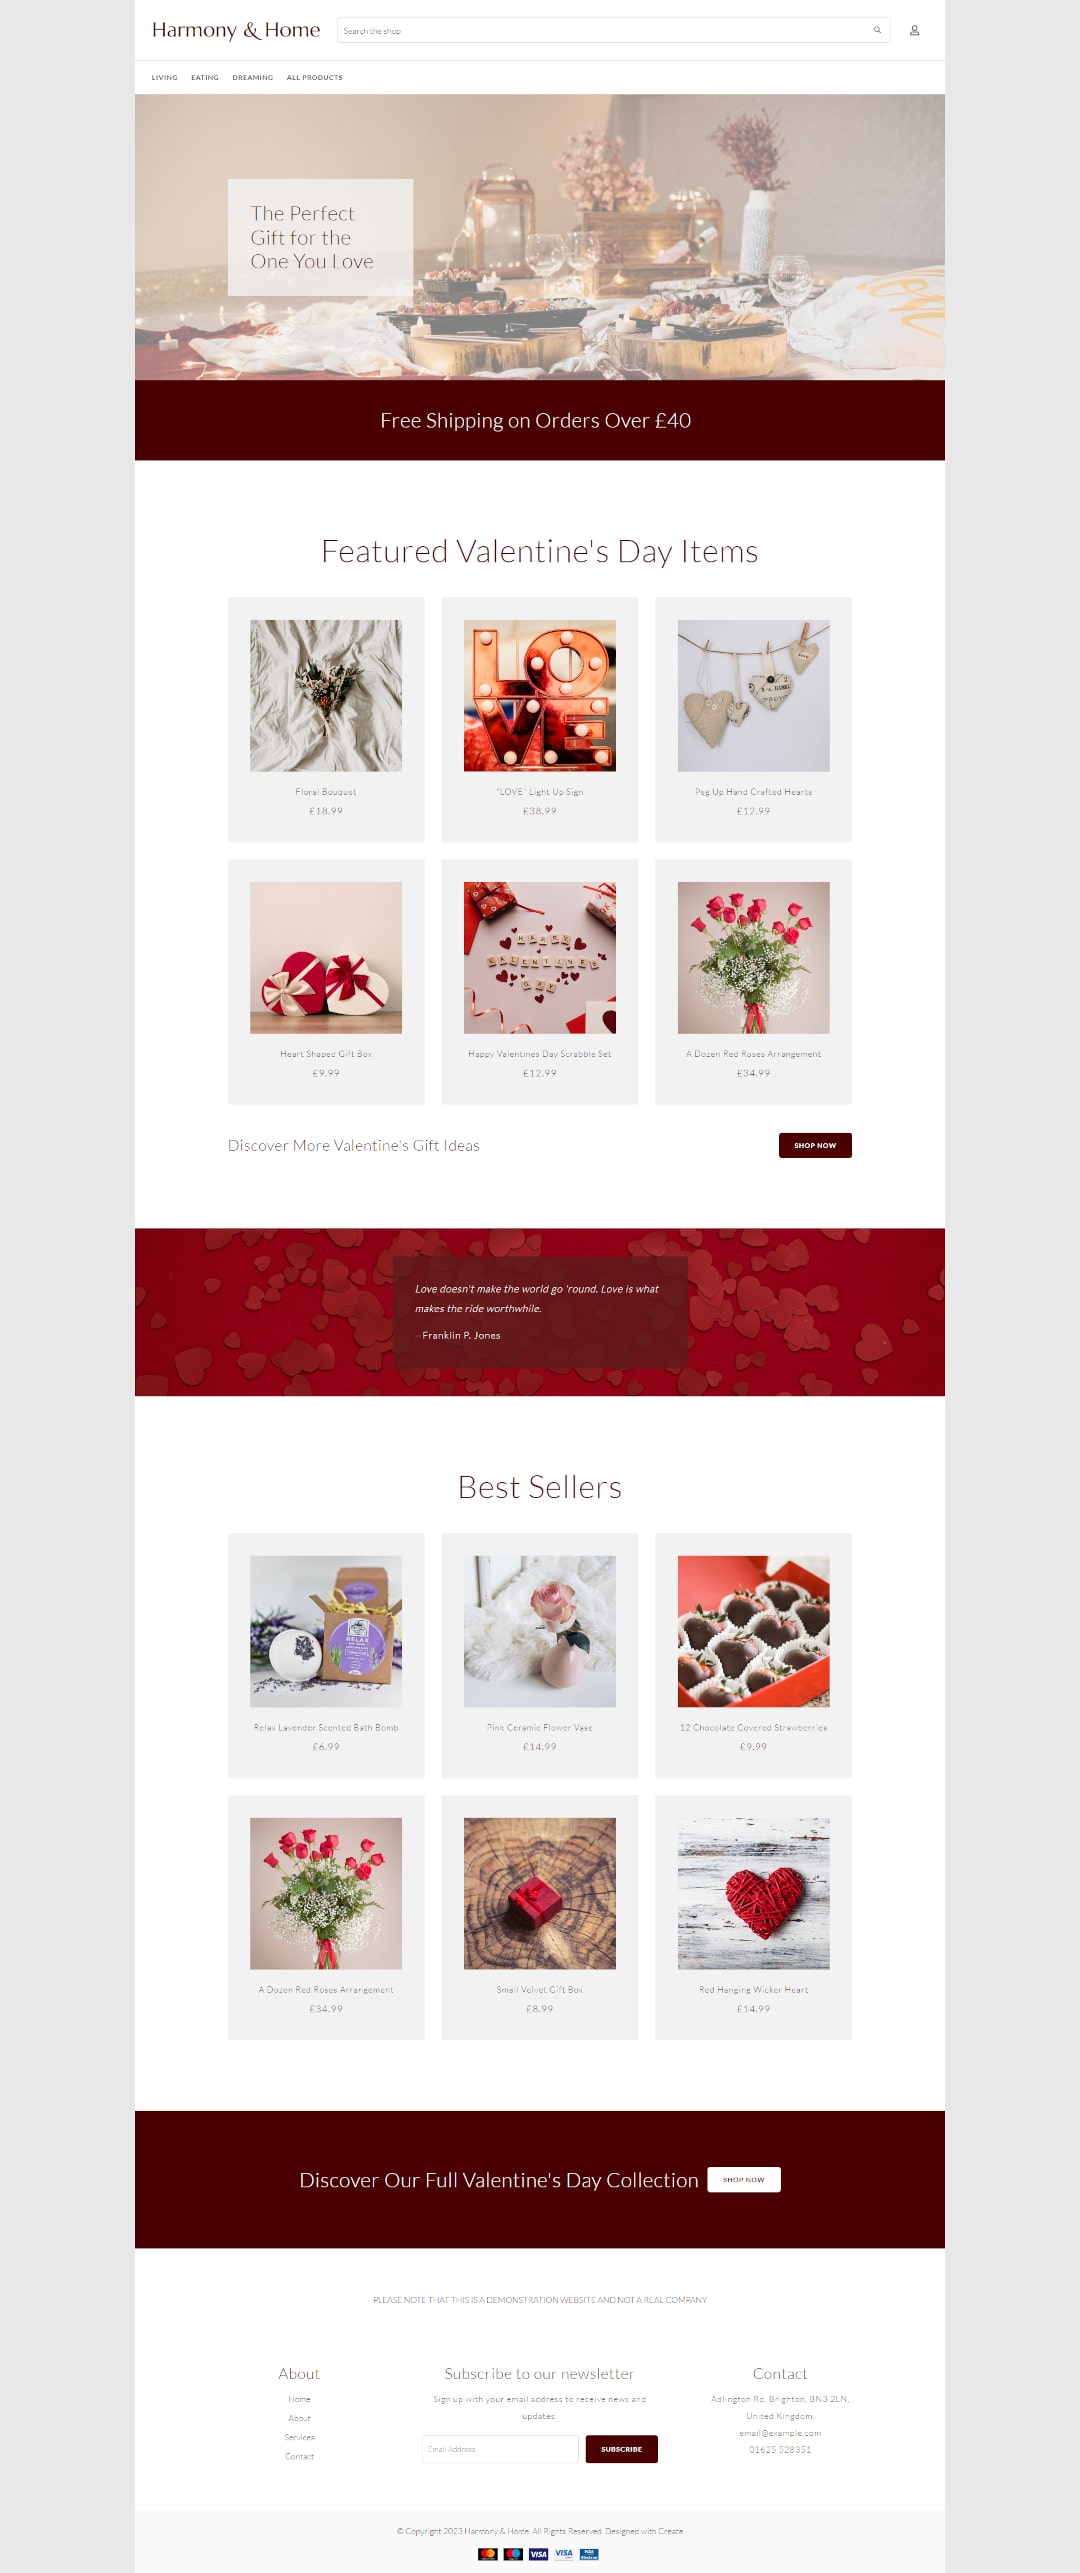 A landing page dedicated to promoting Valentine's Day products and offers